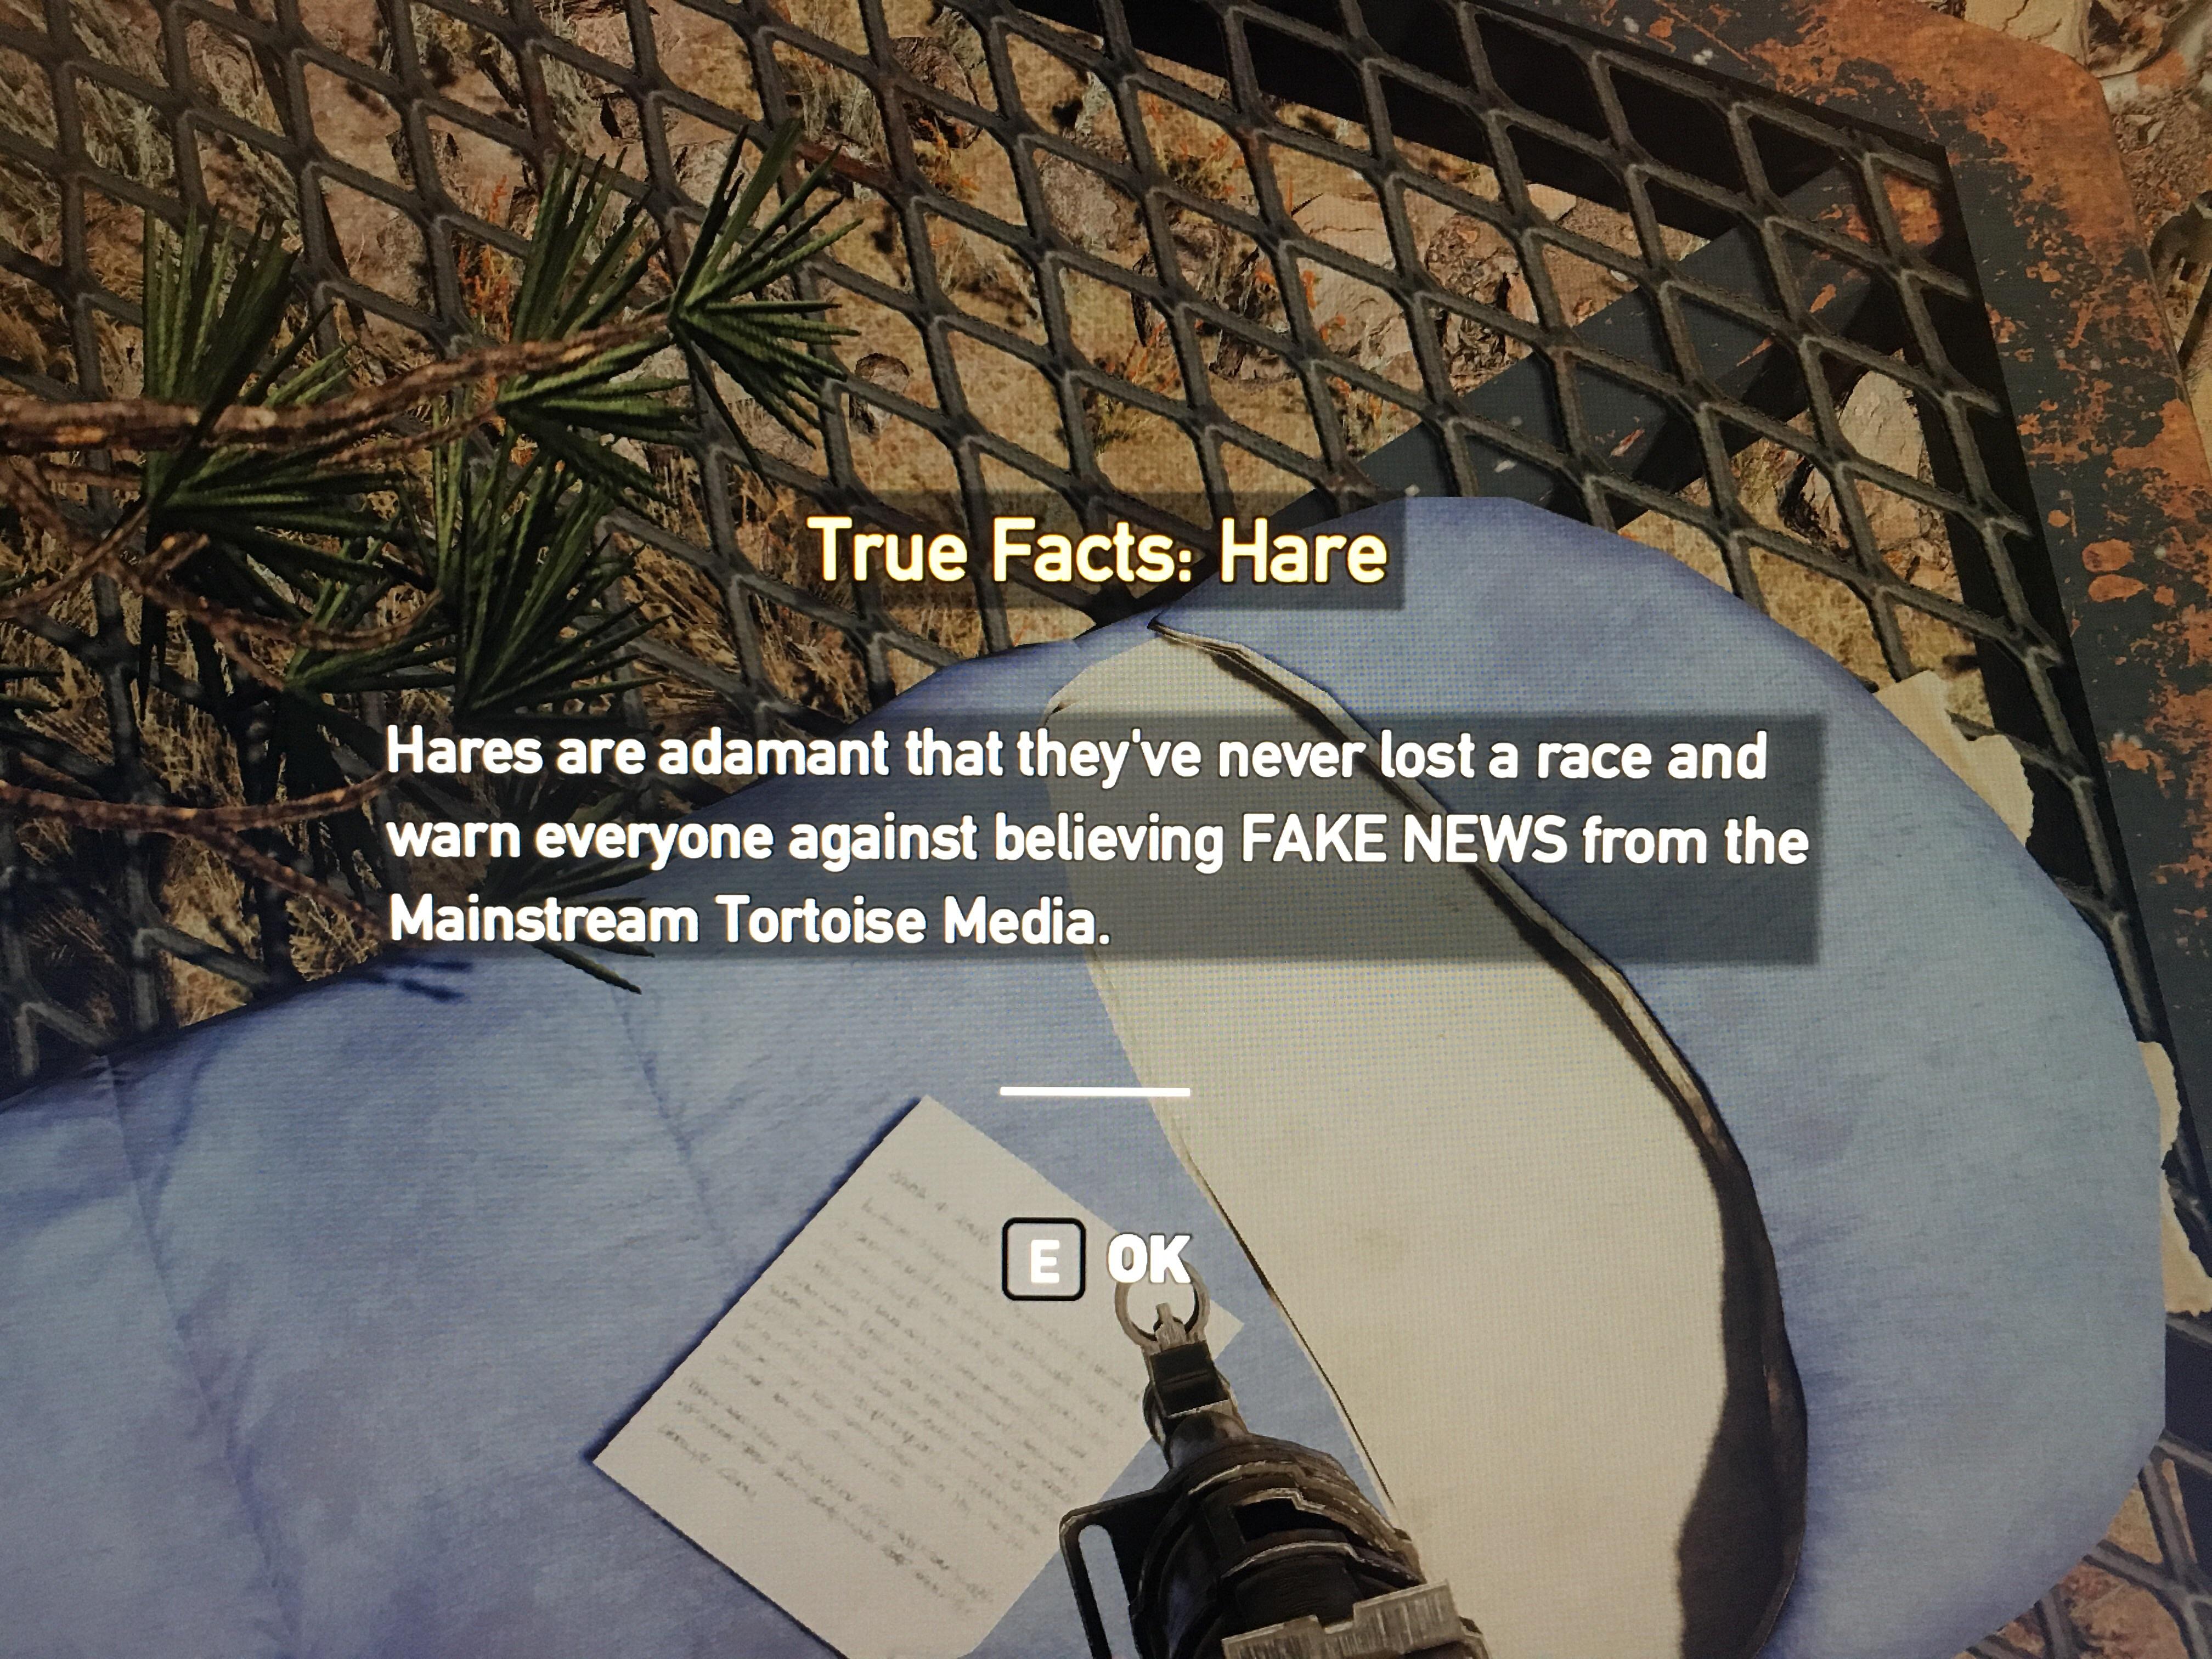 far cry 5 memes reddit - True Facts Hare Hares are adamant that they've never lost a race and warn everyone against believing Fake News from the Mainstream Tortoise Media. E Ok